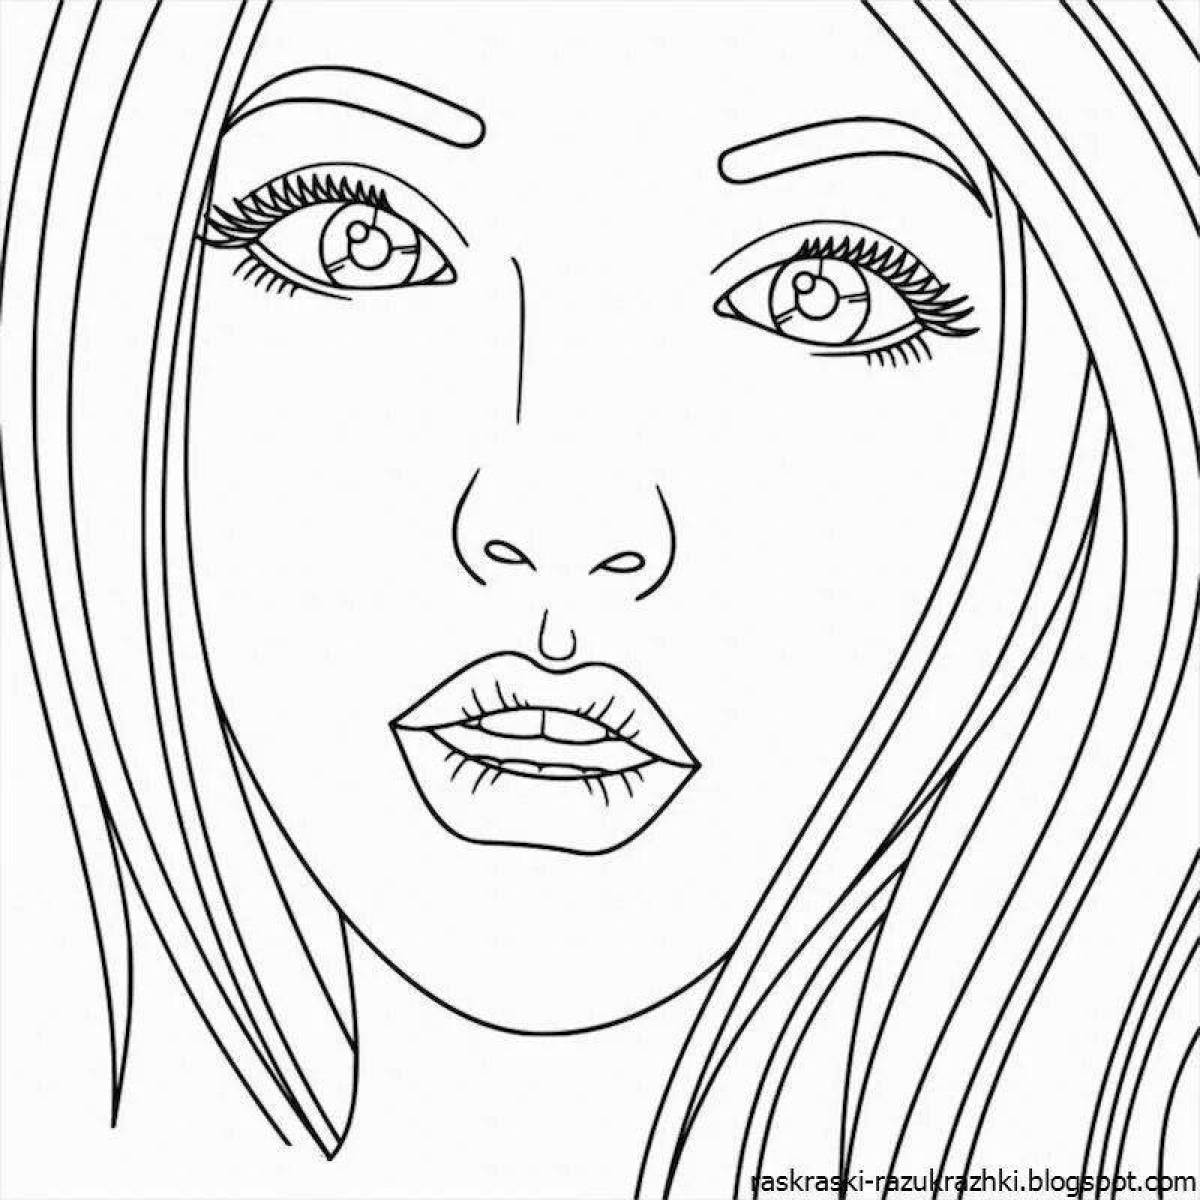 Exquisite coloring book for girls